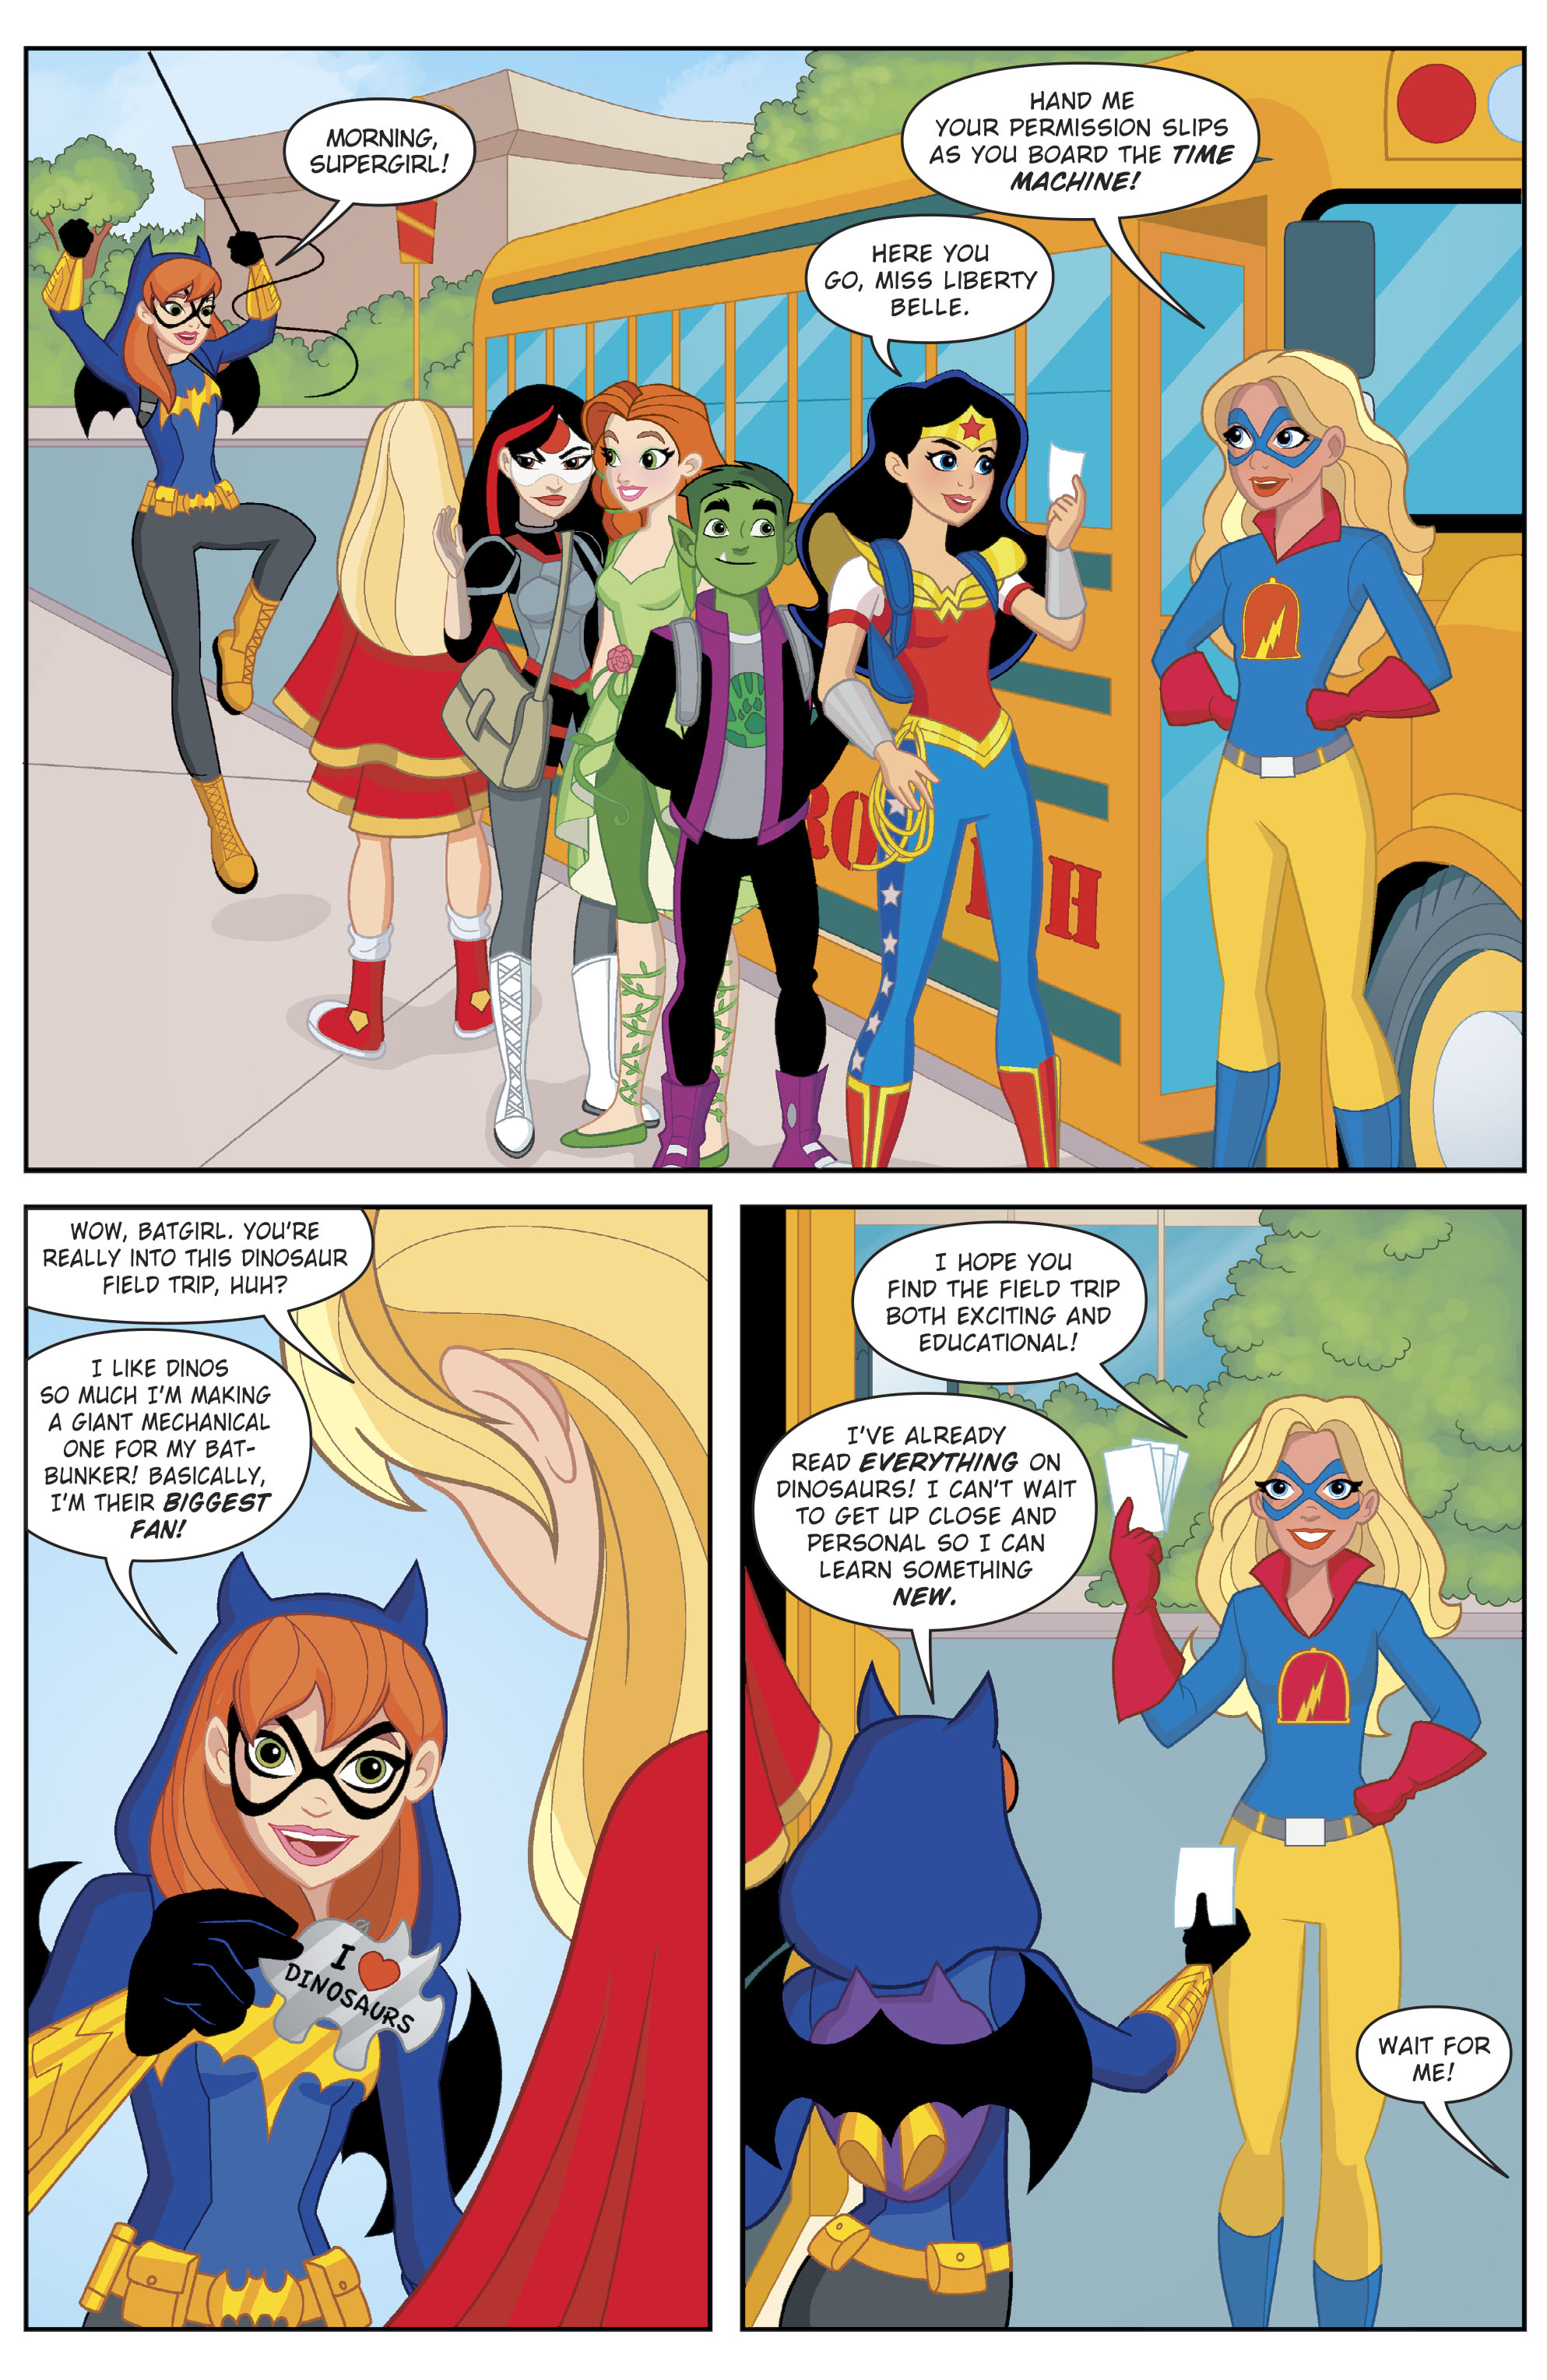 DC Super Hero Girls 2017 Halloween Comic Fest Special Edition (2017): Chapter 1 - Page 3